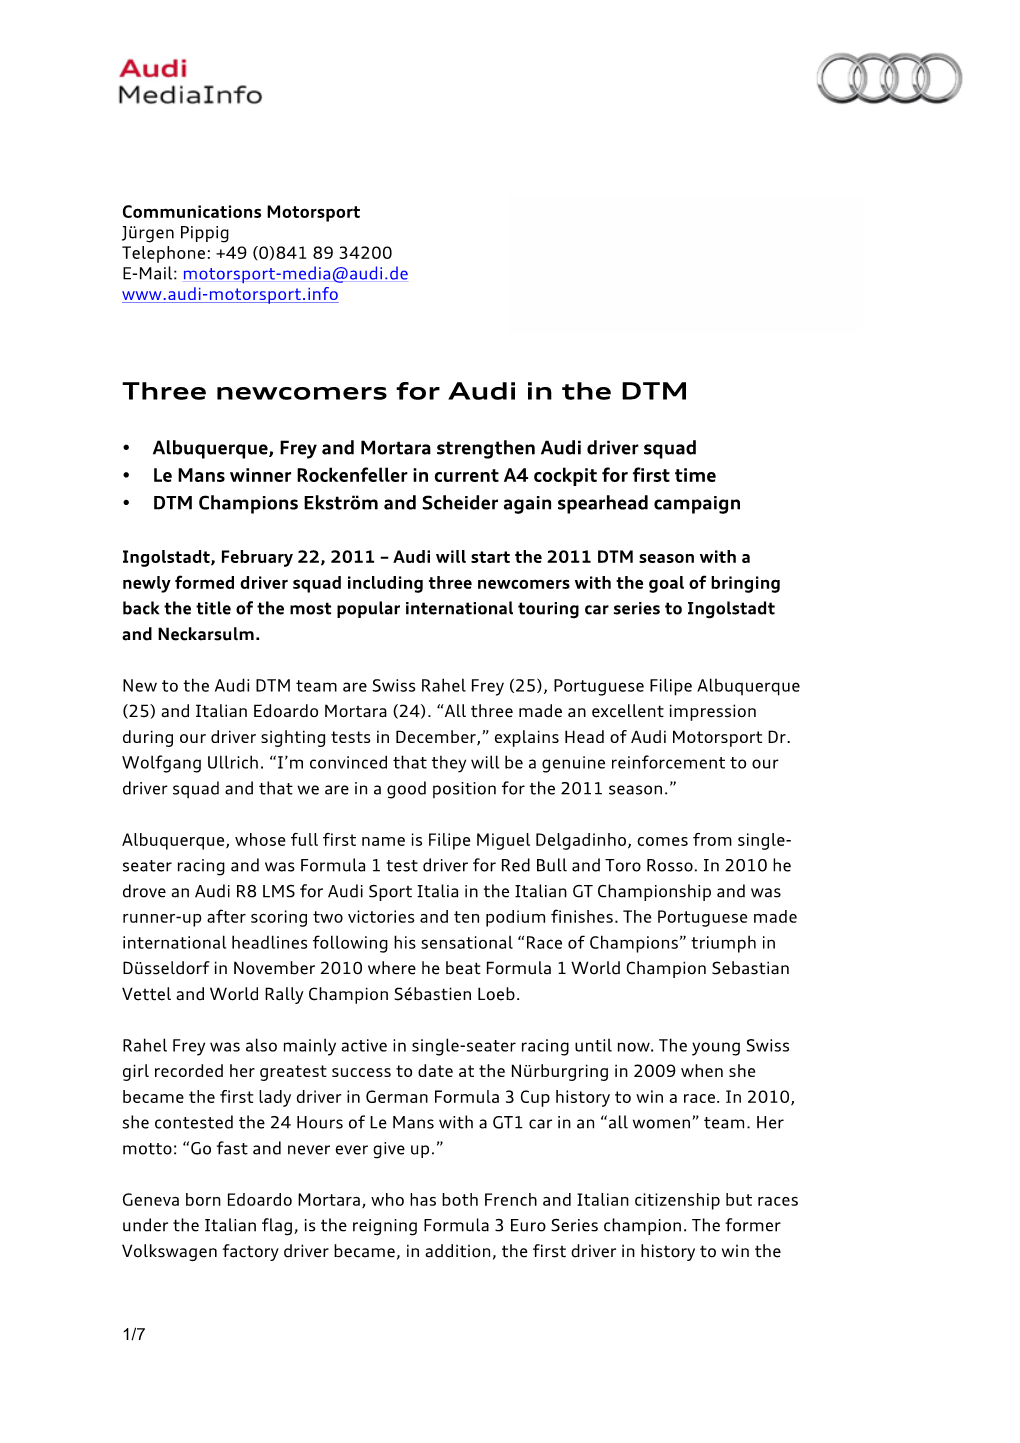 Three Newcomers for Audi in the DTM